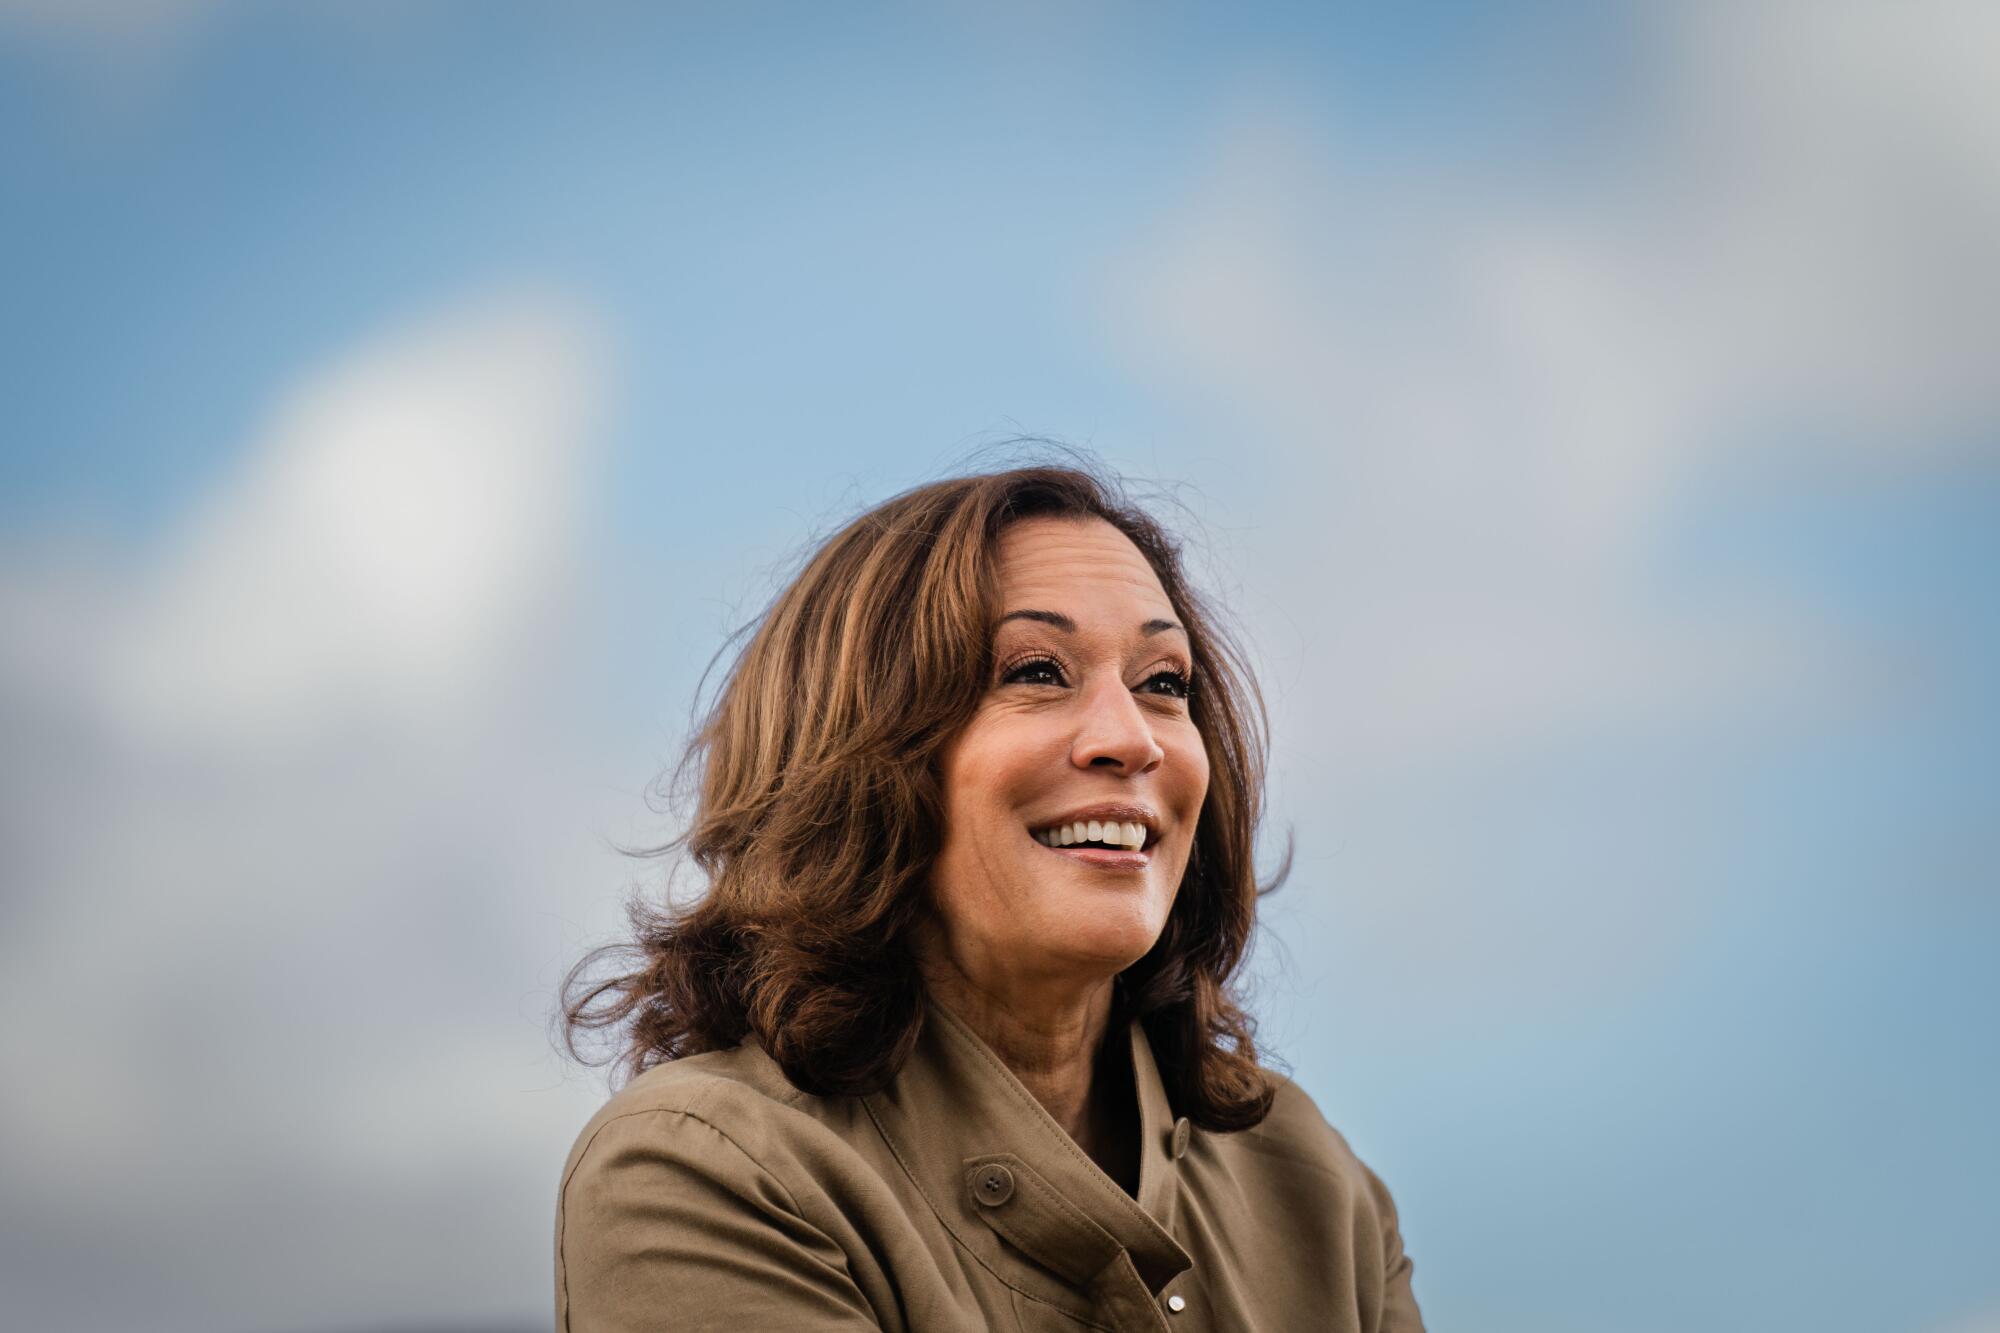 A head-and-shoulders frame of Kamala Harris against a soft blue sky with clouds.